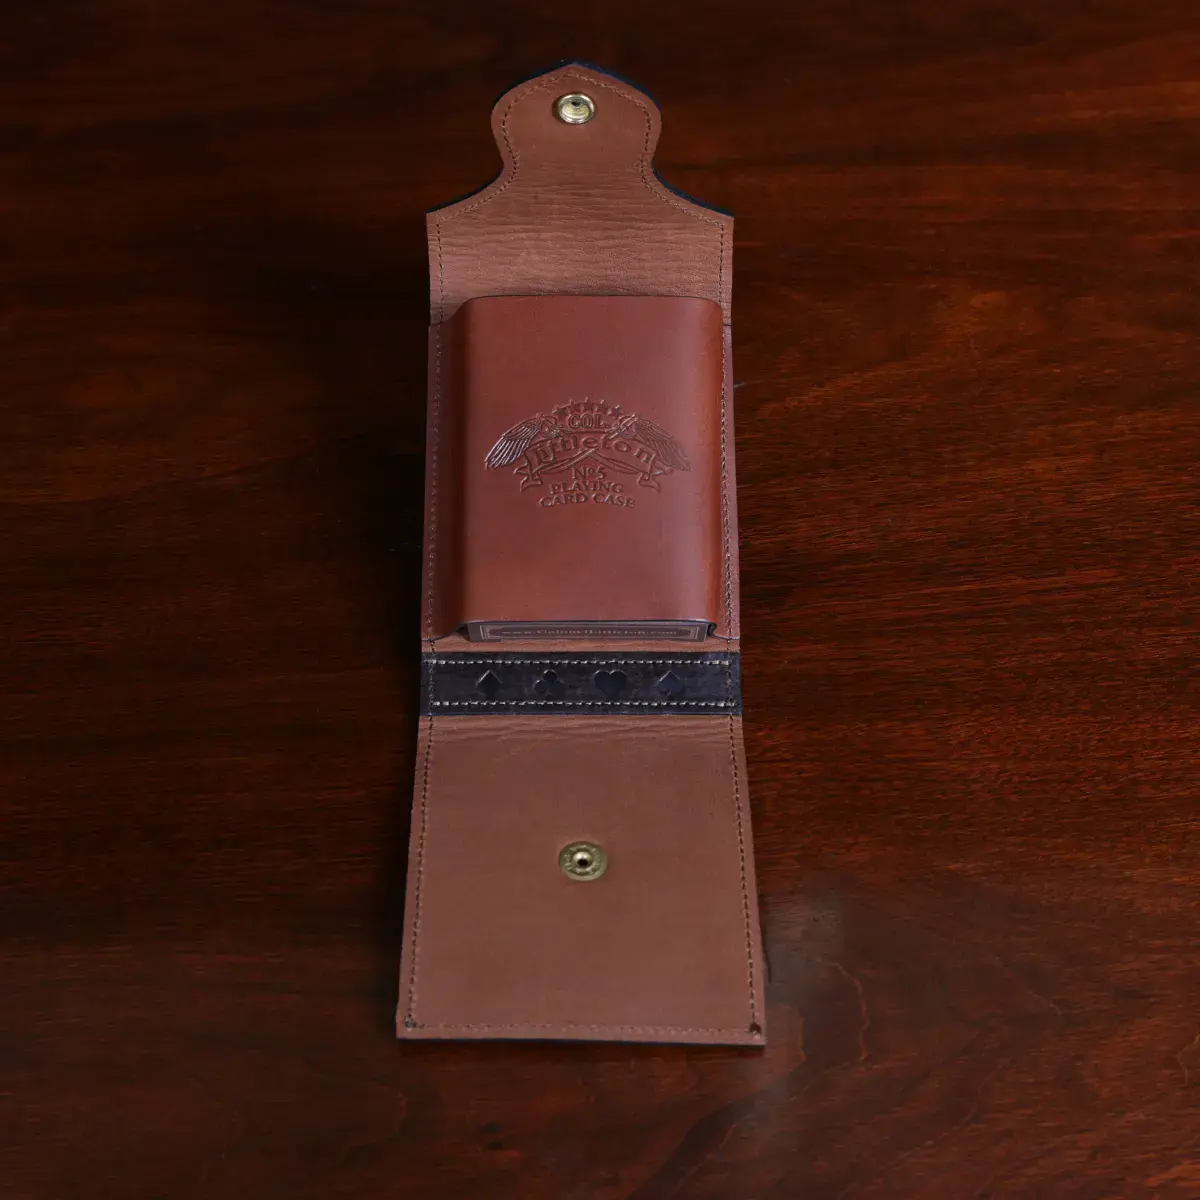 Leather playing card case, hold one deck of playing cards. showing the open view